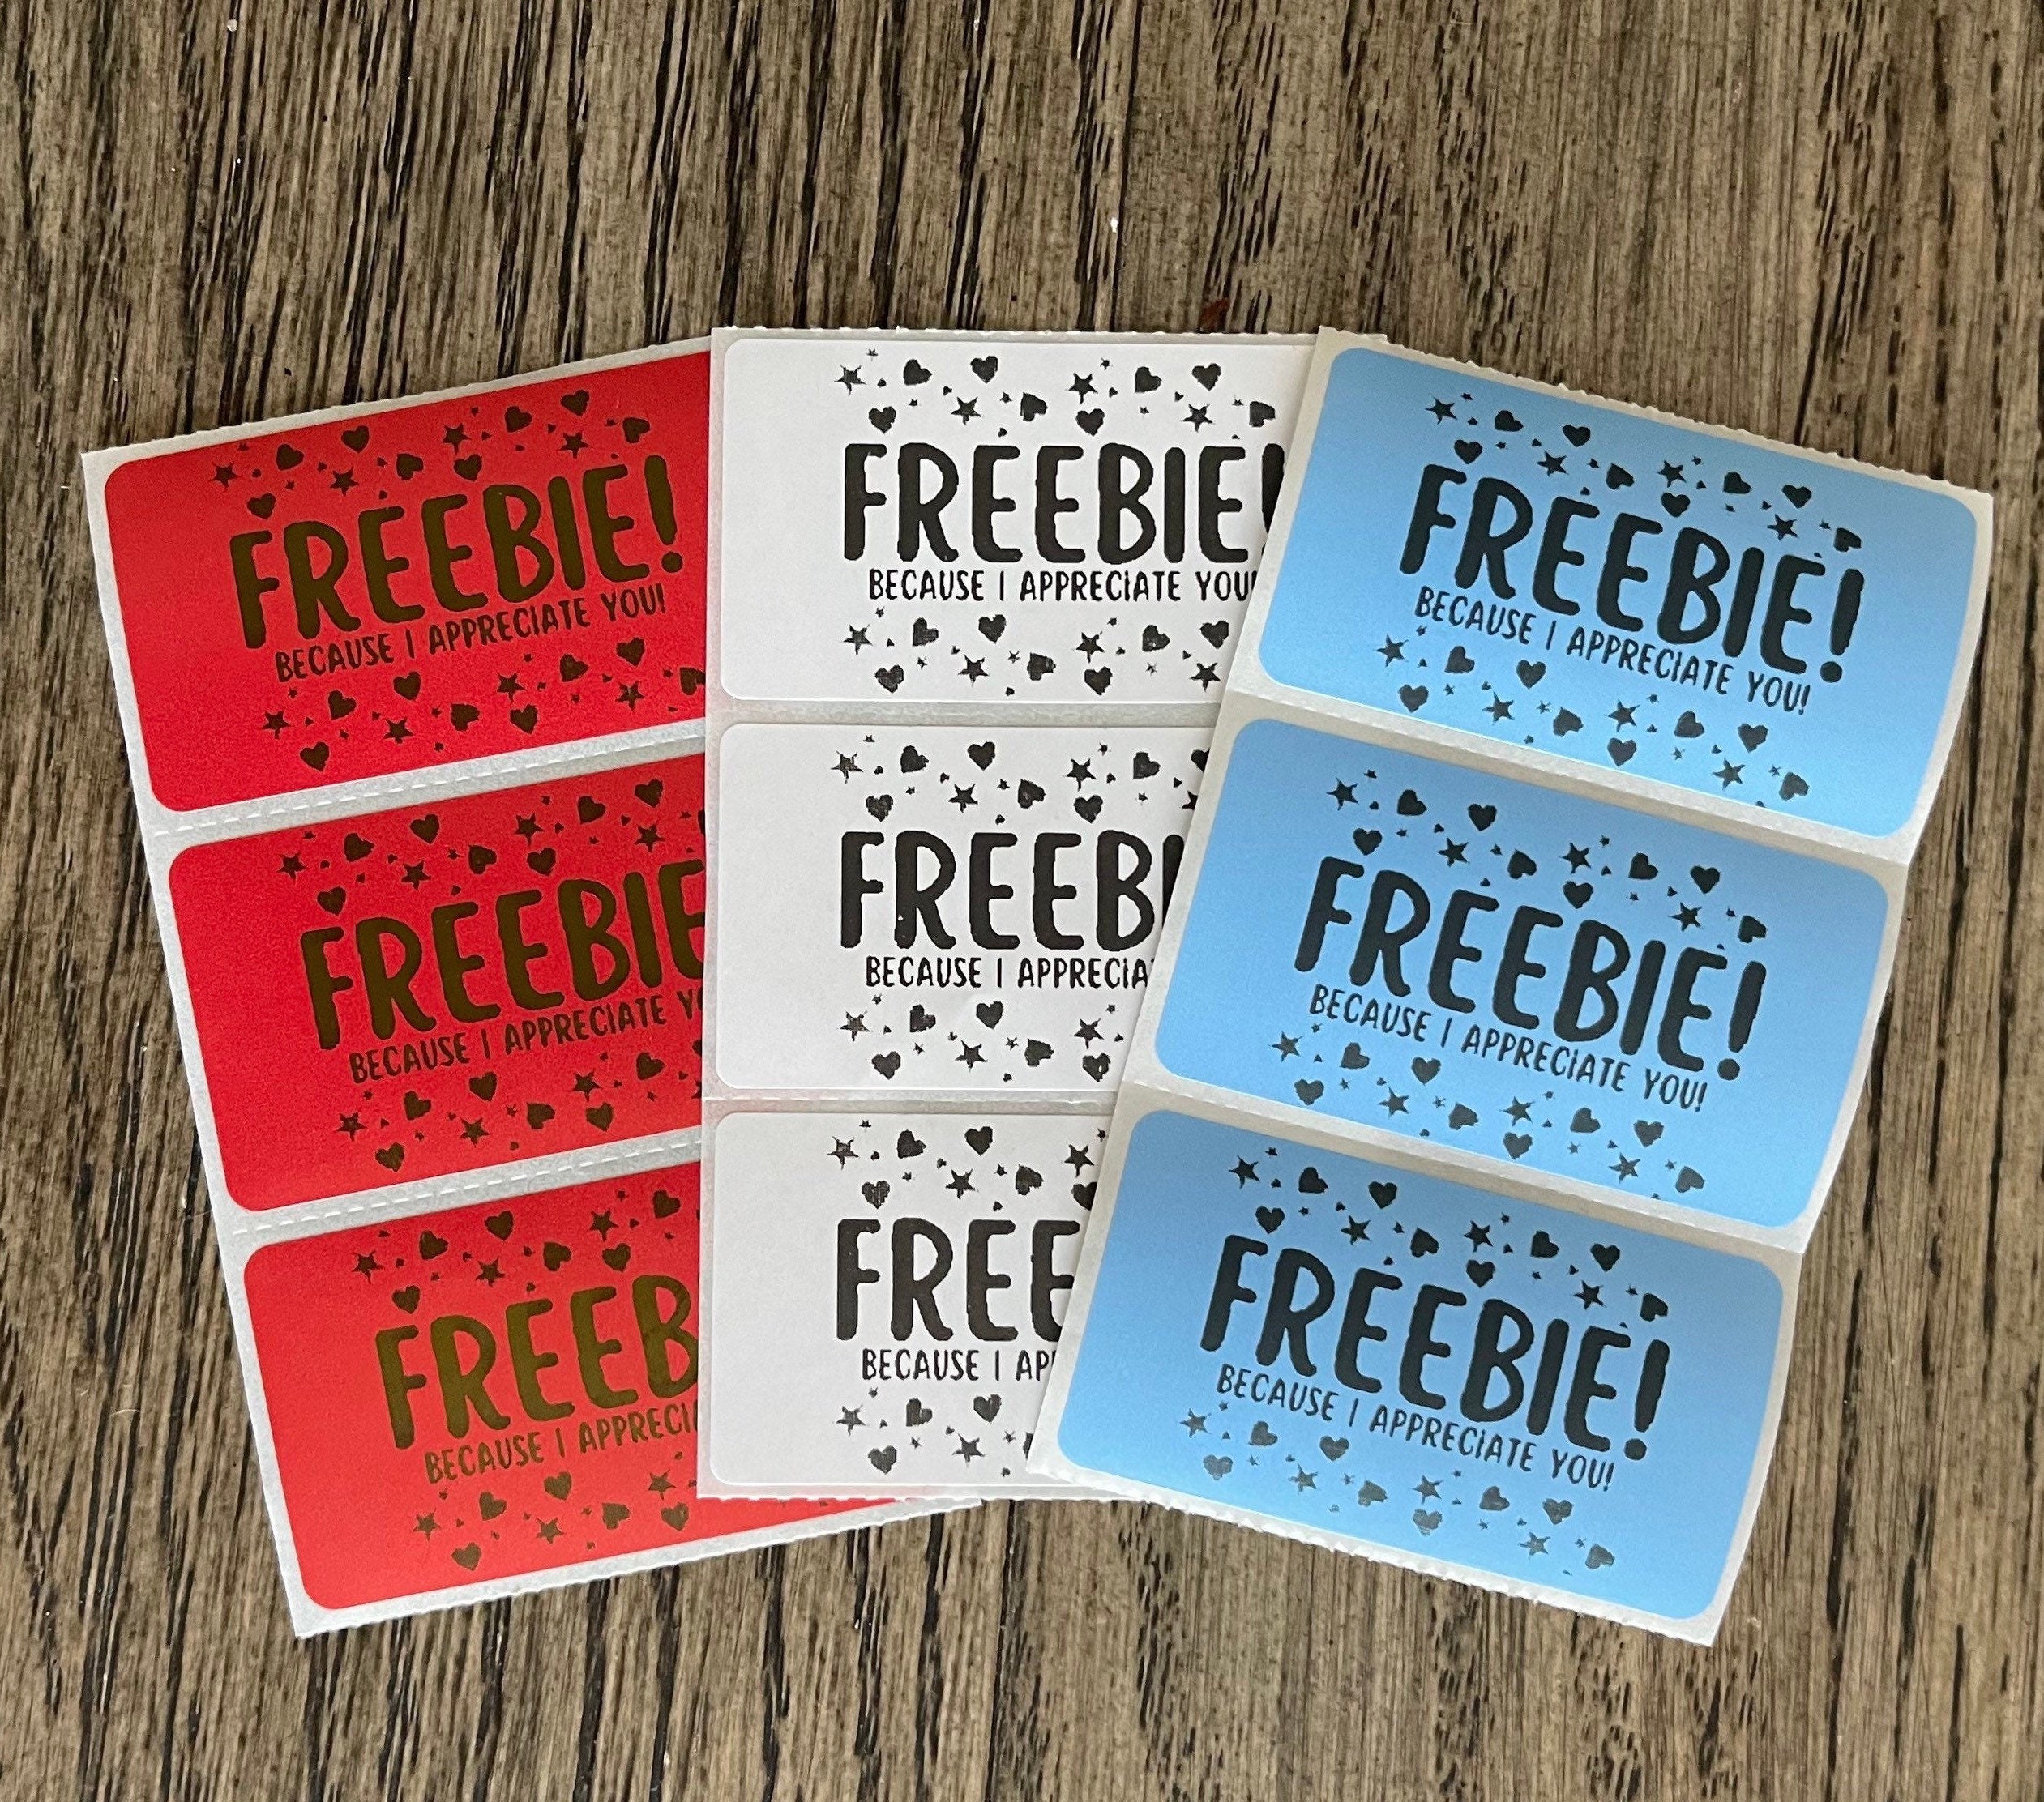 Freebie Stickers, Free Sample Sticker, Small Business Packaging